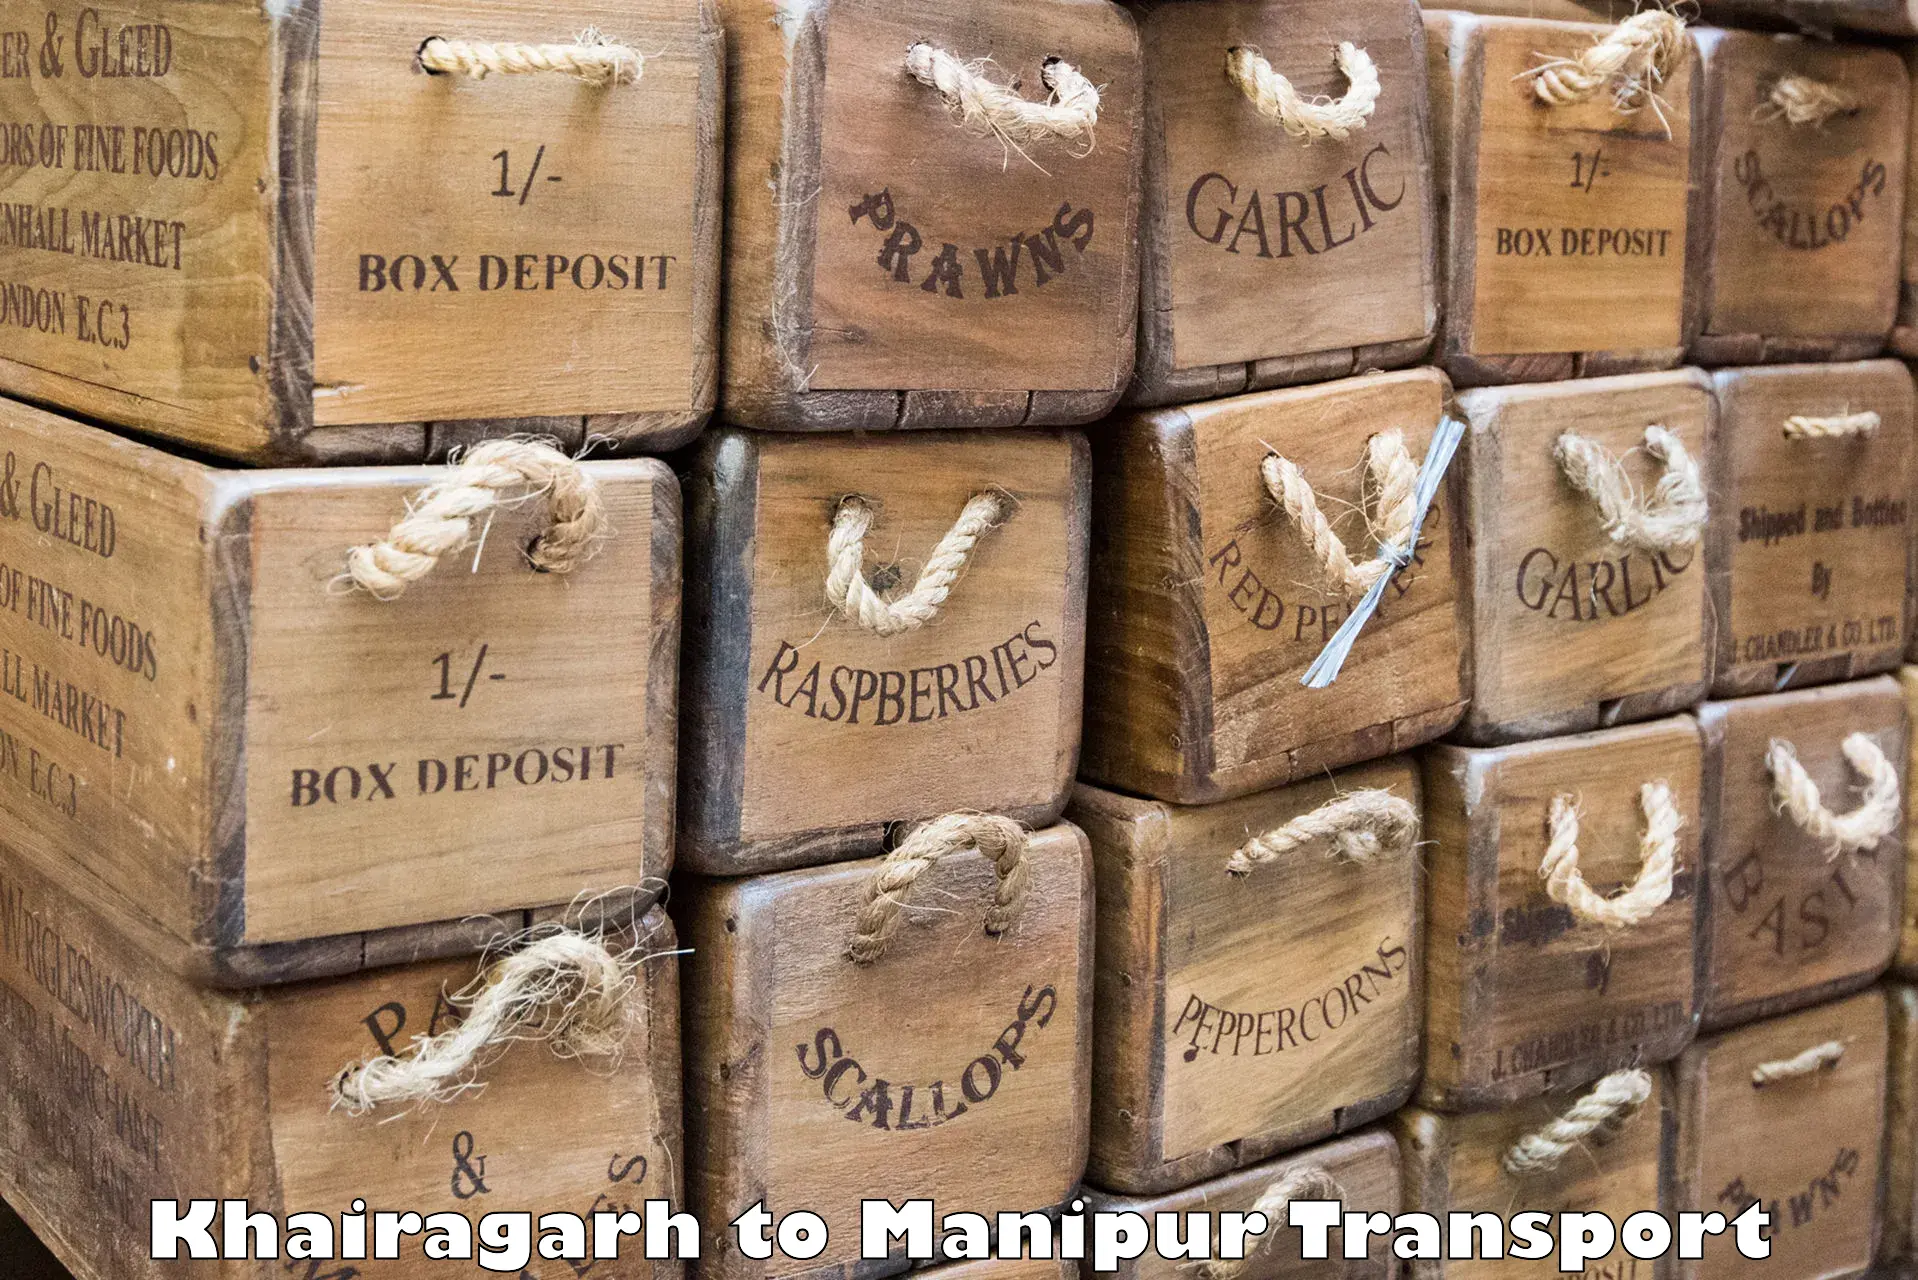 Daily transport service Khairagarh to Manipur